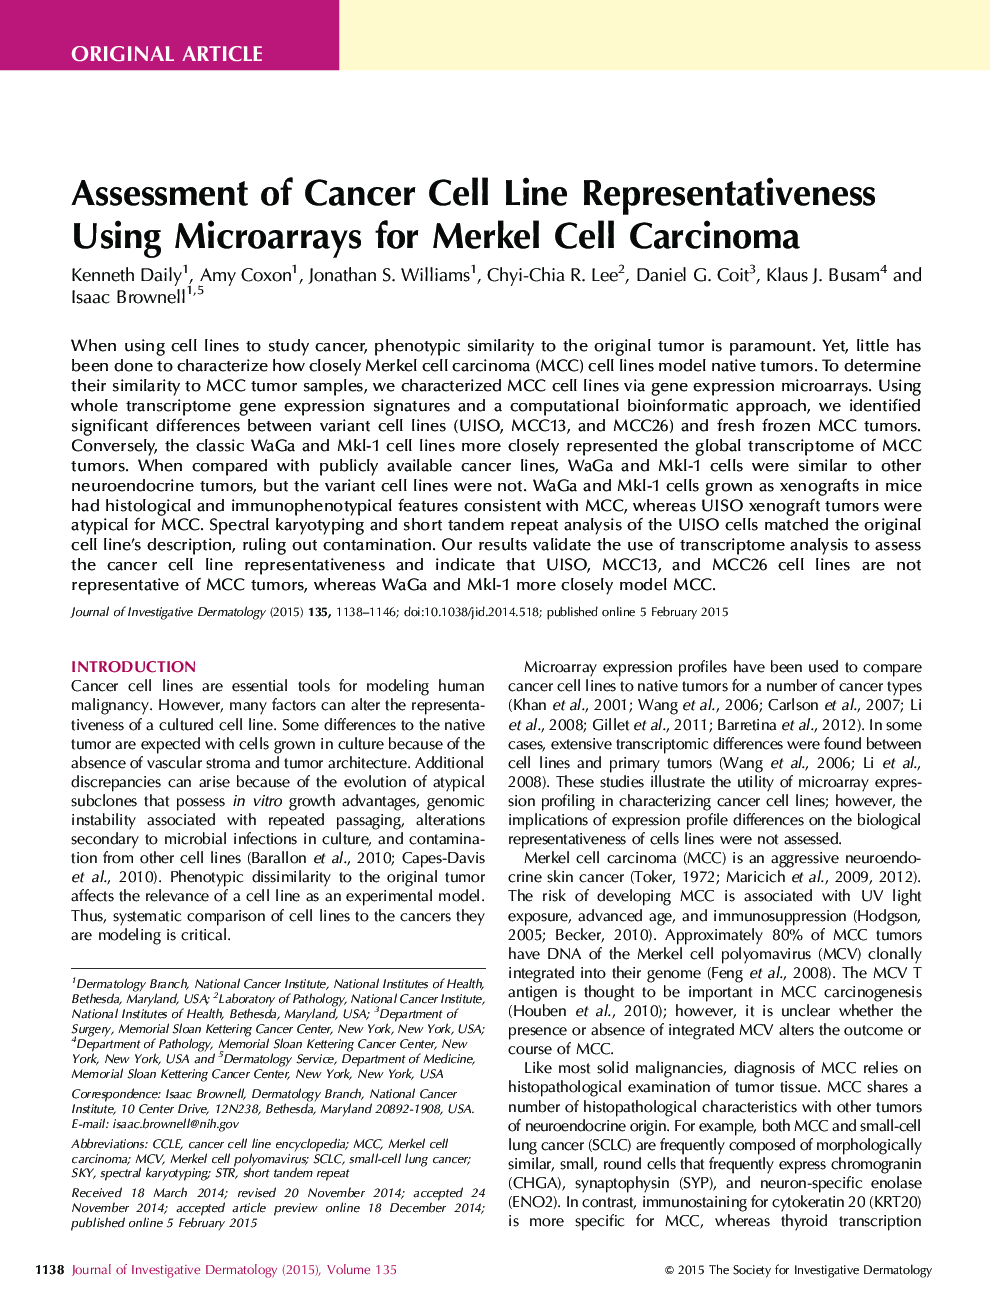 Assessment of Cancer Cell Line Representativeness Using Microarrays for Merkel Cell Carcinoma